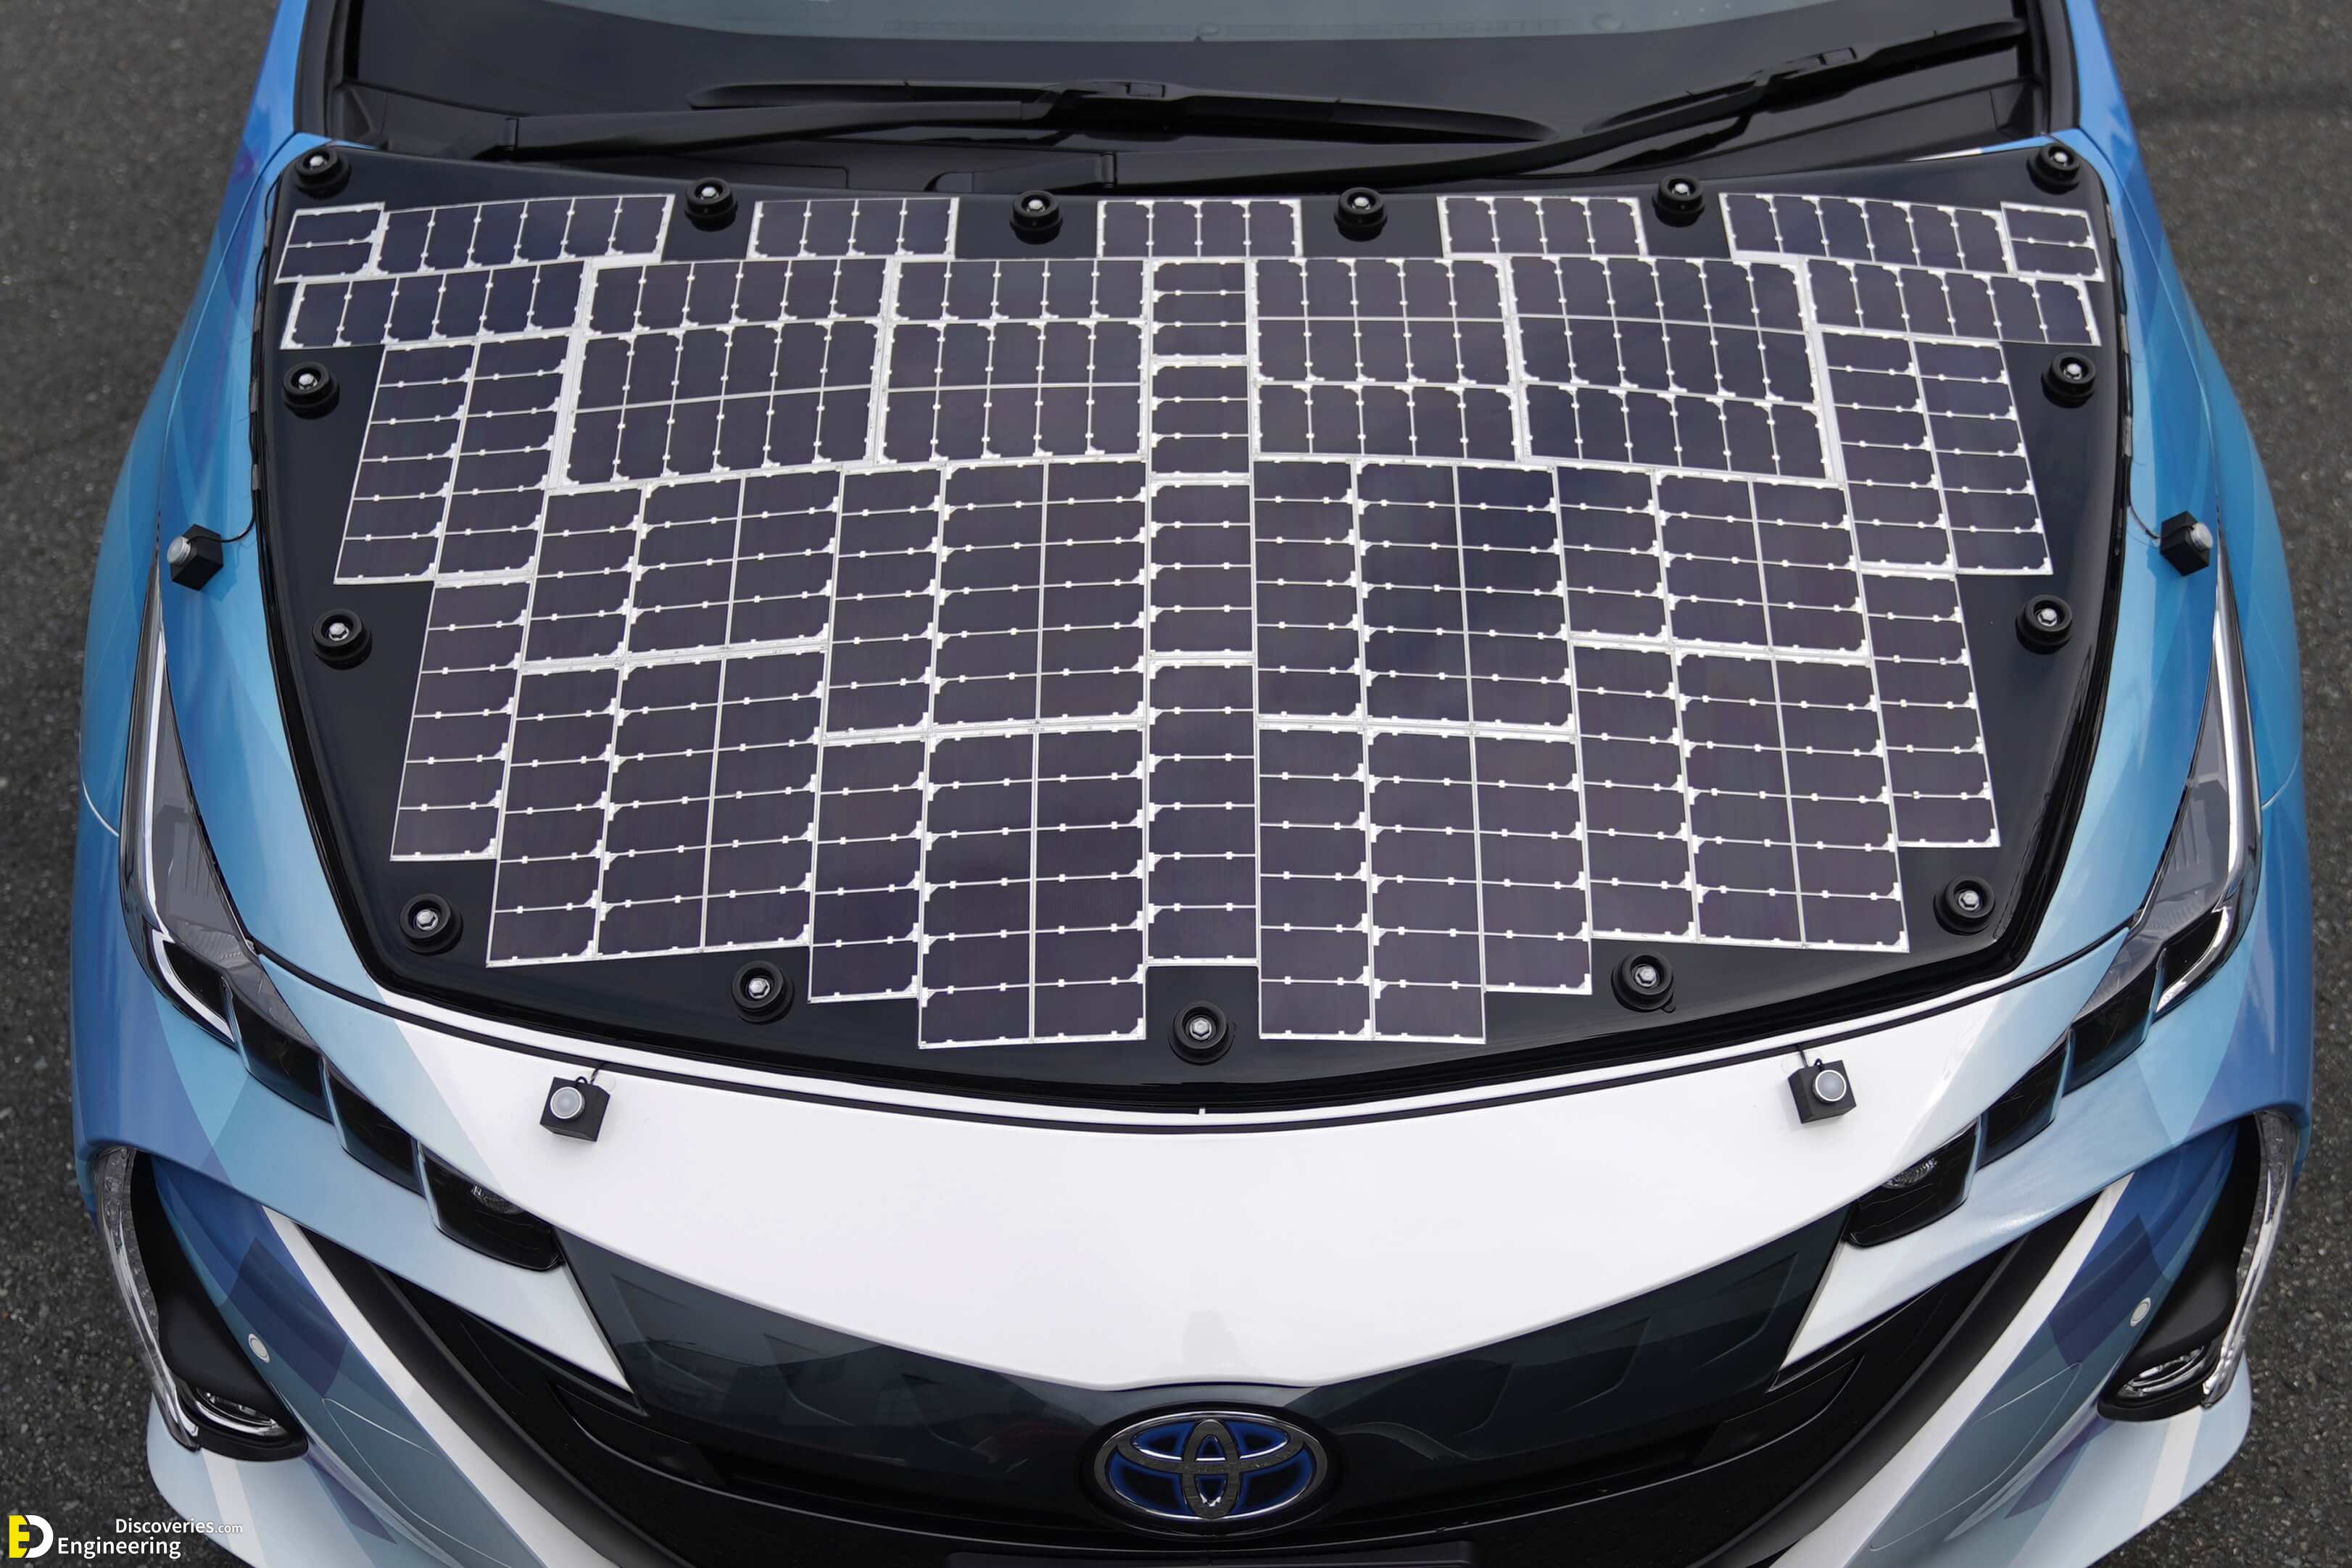 Toyota Is Working On A Prius Model That Will Run Forever On Solar Power